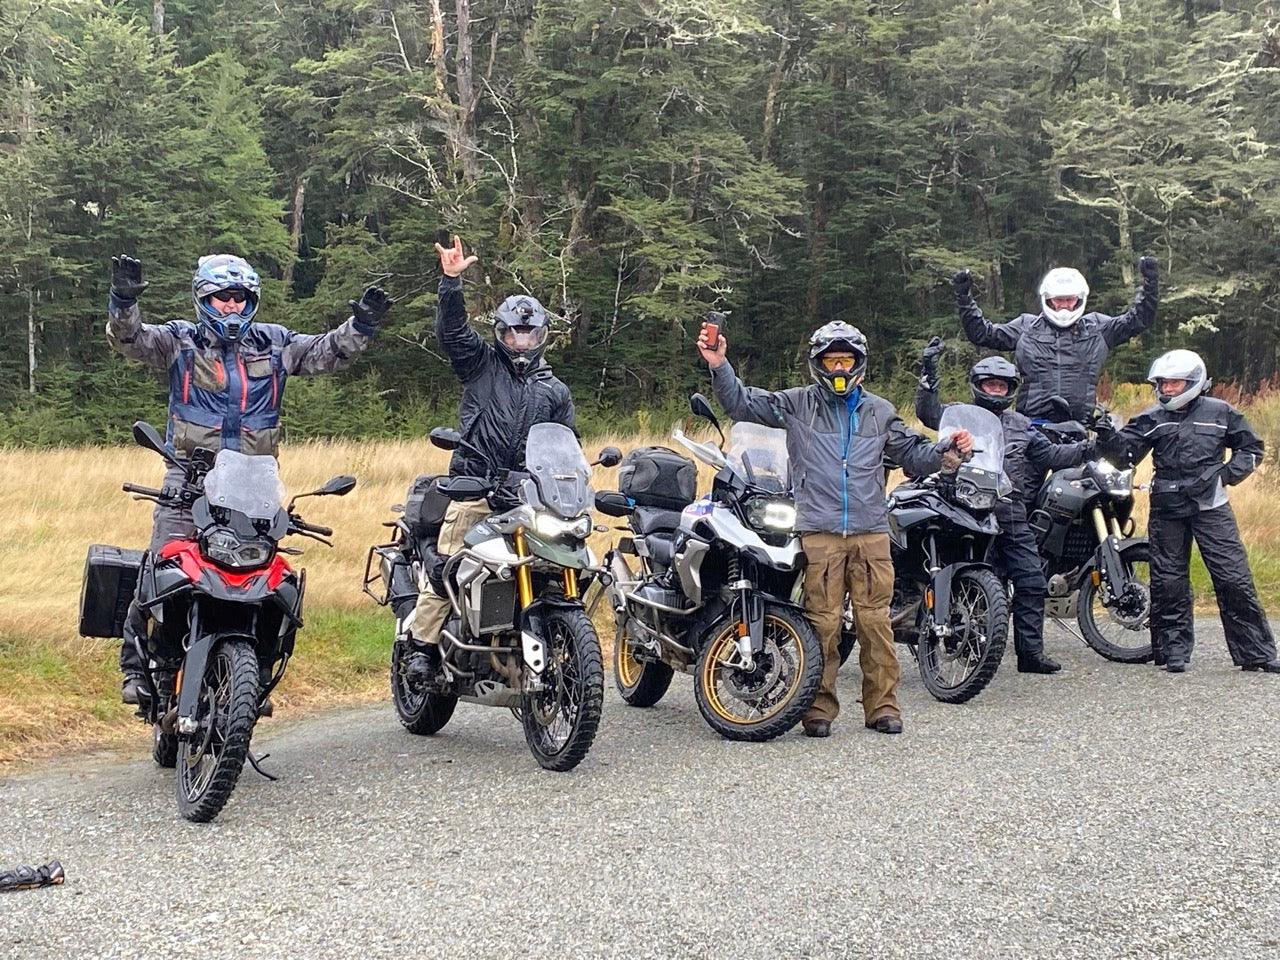 A group of joyful motorcyclists raising their arms in celebration on a forest-lined road